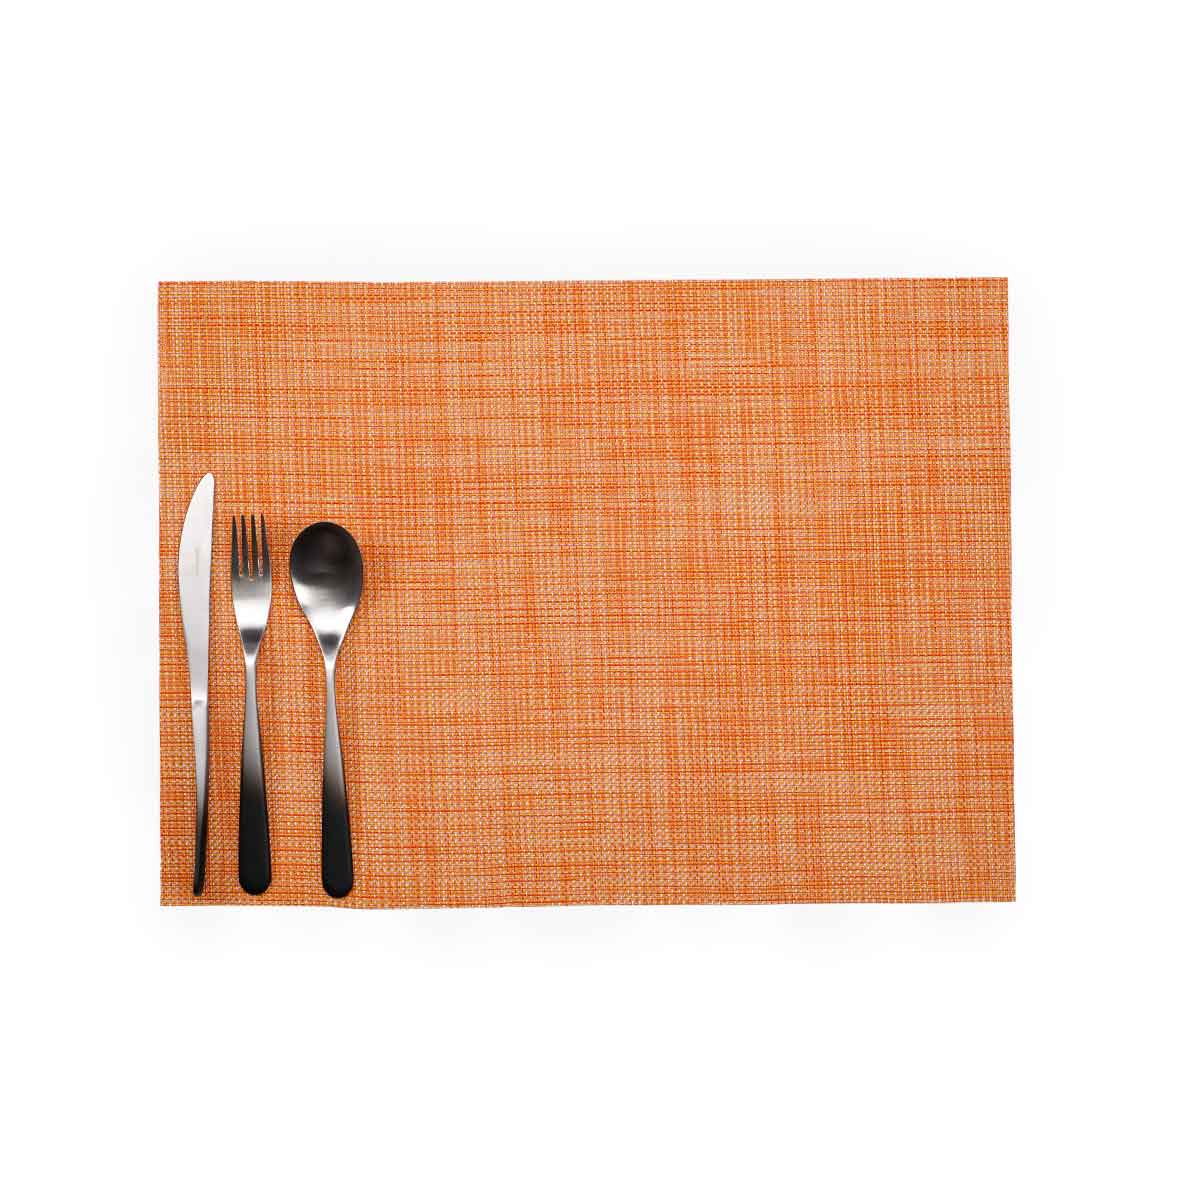 Chilewich Minibasket Clementine Table Mat